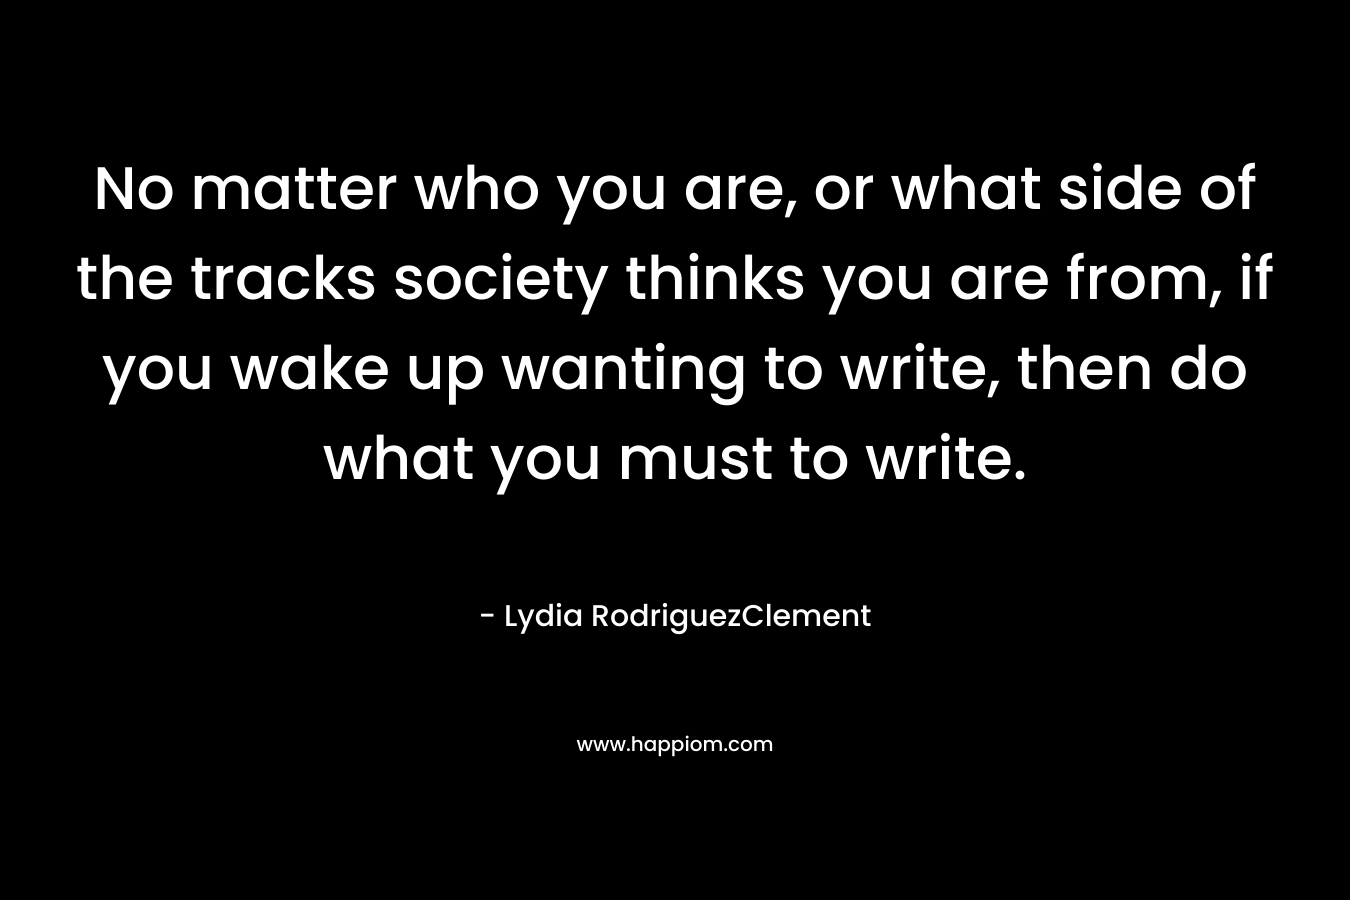 No matter who you are, or what side of the tracks society thinks you are from, if you wake up wanting to write, then do what you must to write. – Lydia RodriguezClement